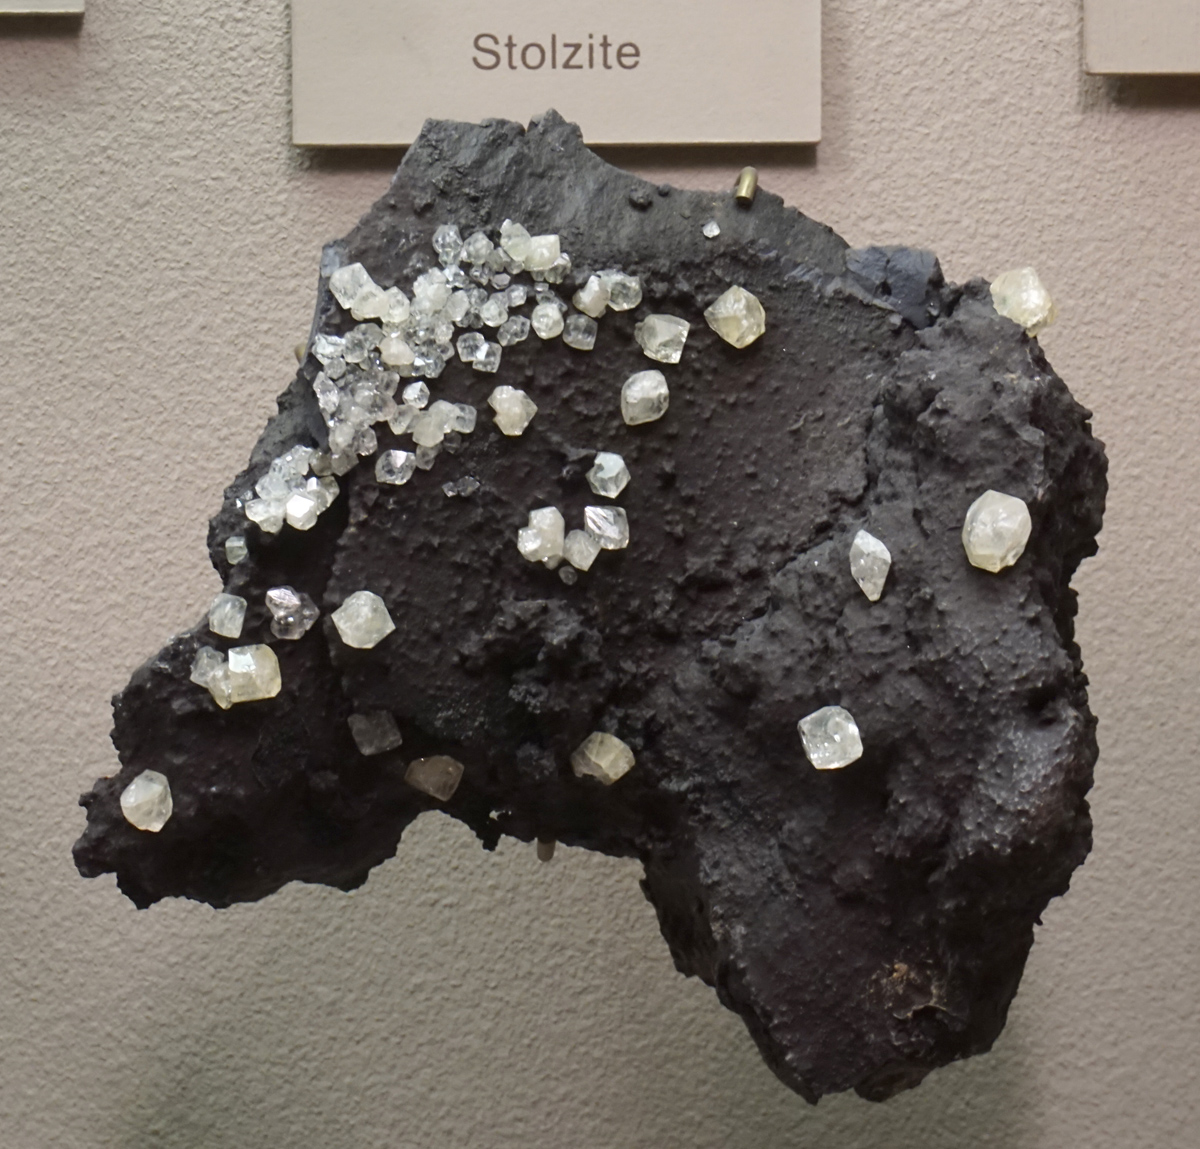 Lustrous White Stolzite Crystals from Broken Hill, New South Wales, Australia